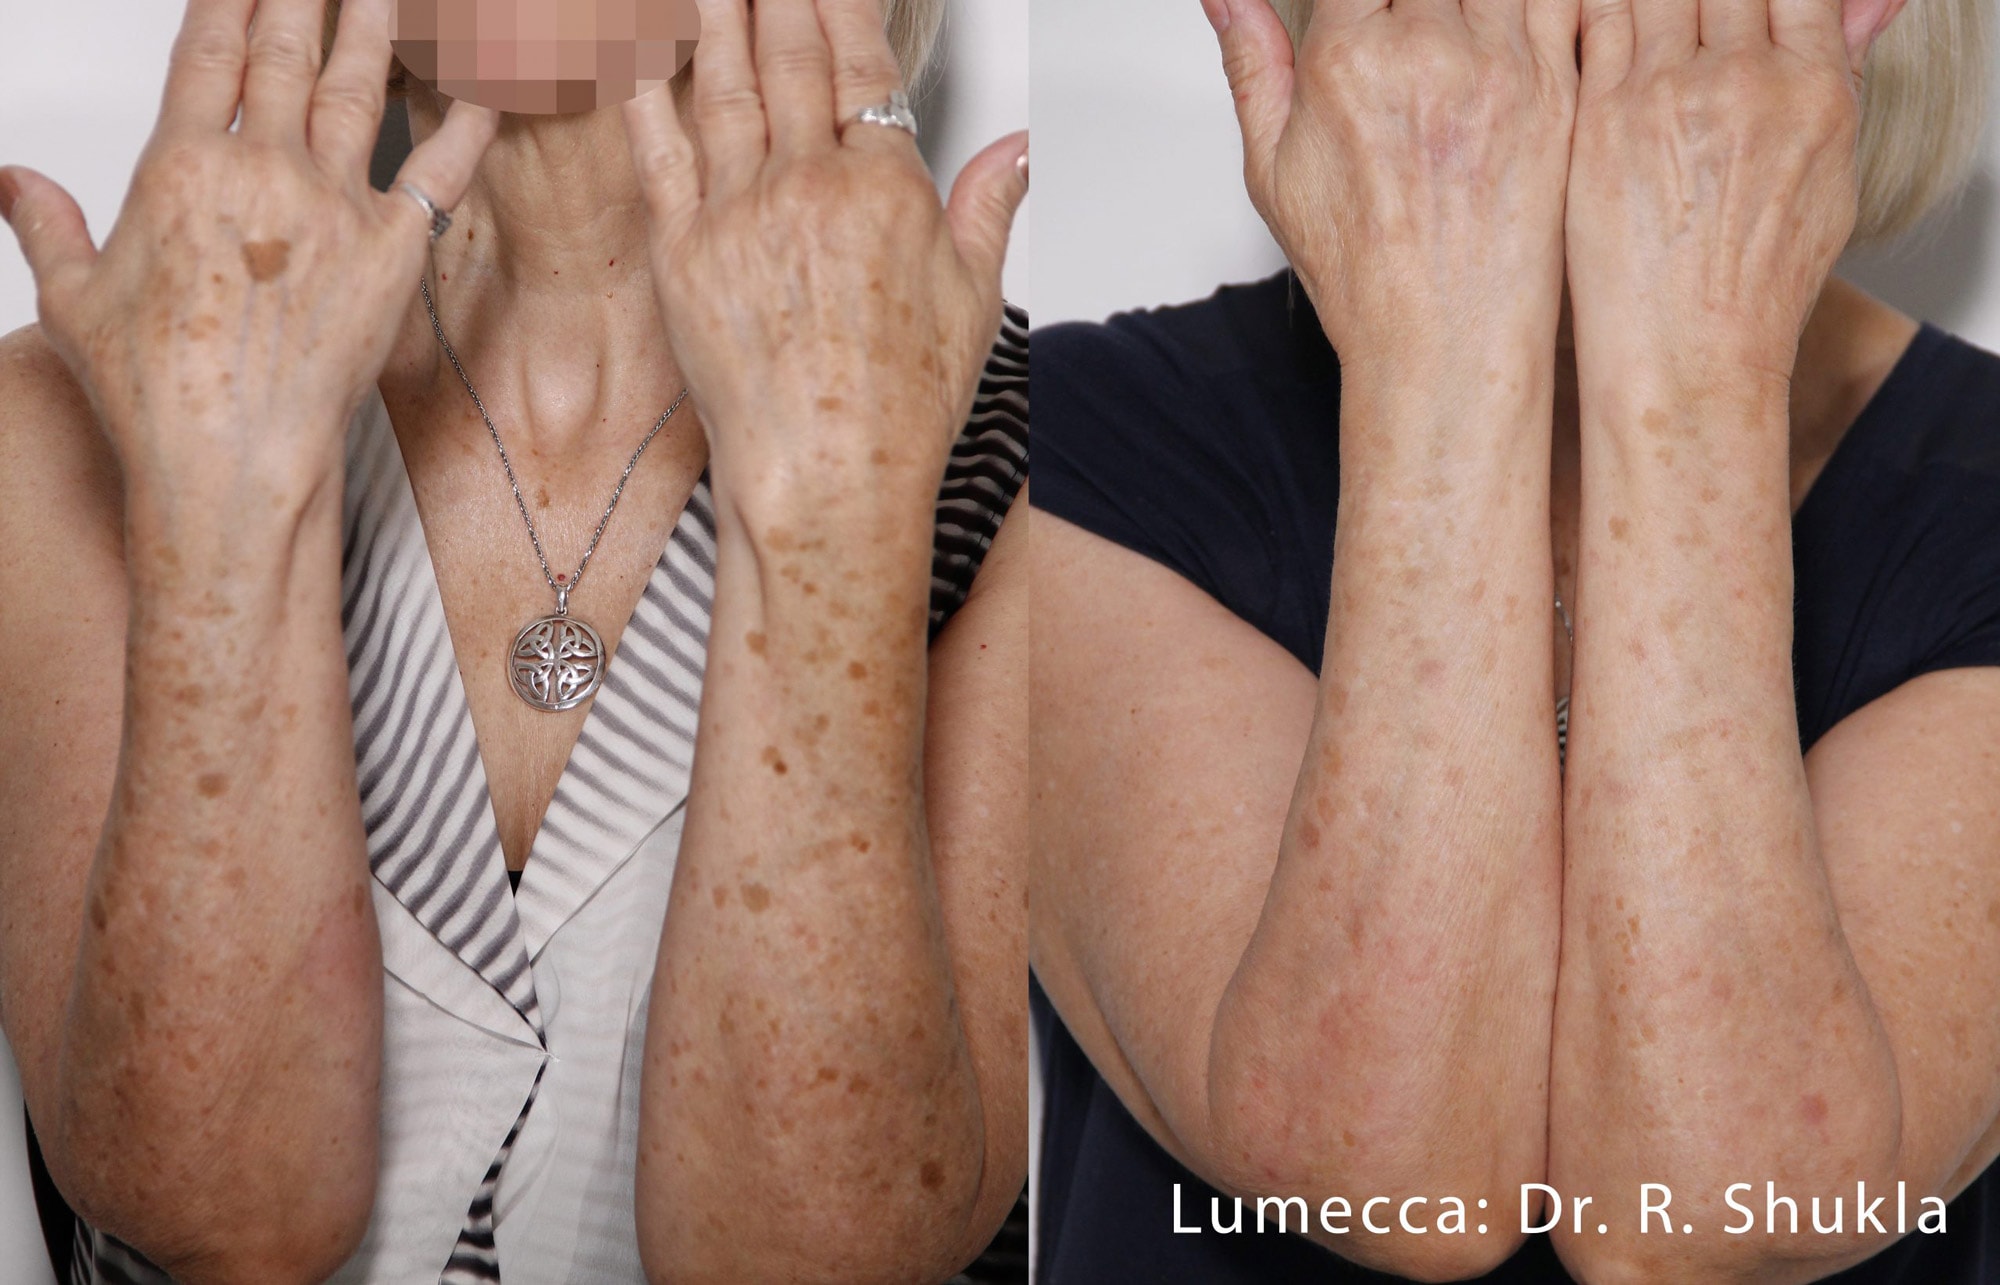 Before and After shots showing the results of Lumecca treatments eliminating sunspots and dark spots on the arms and hands